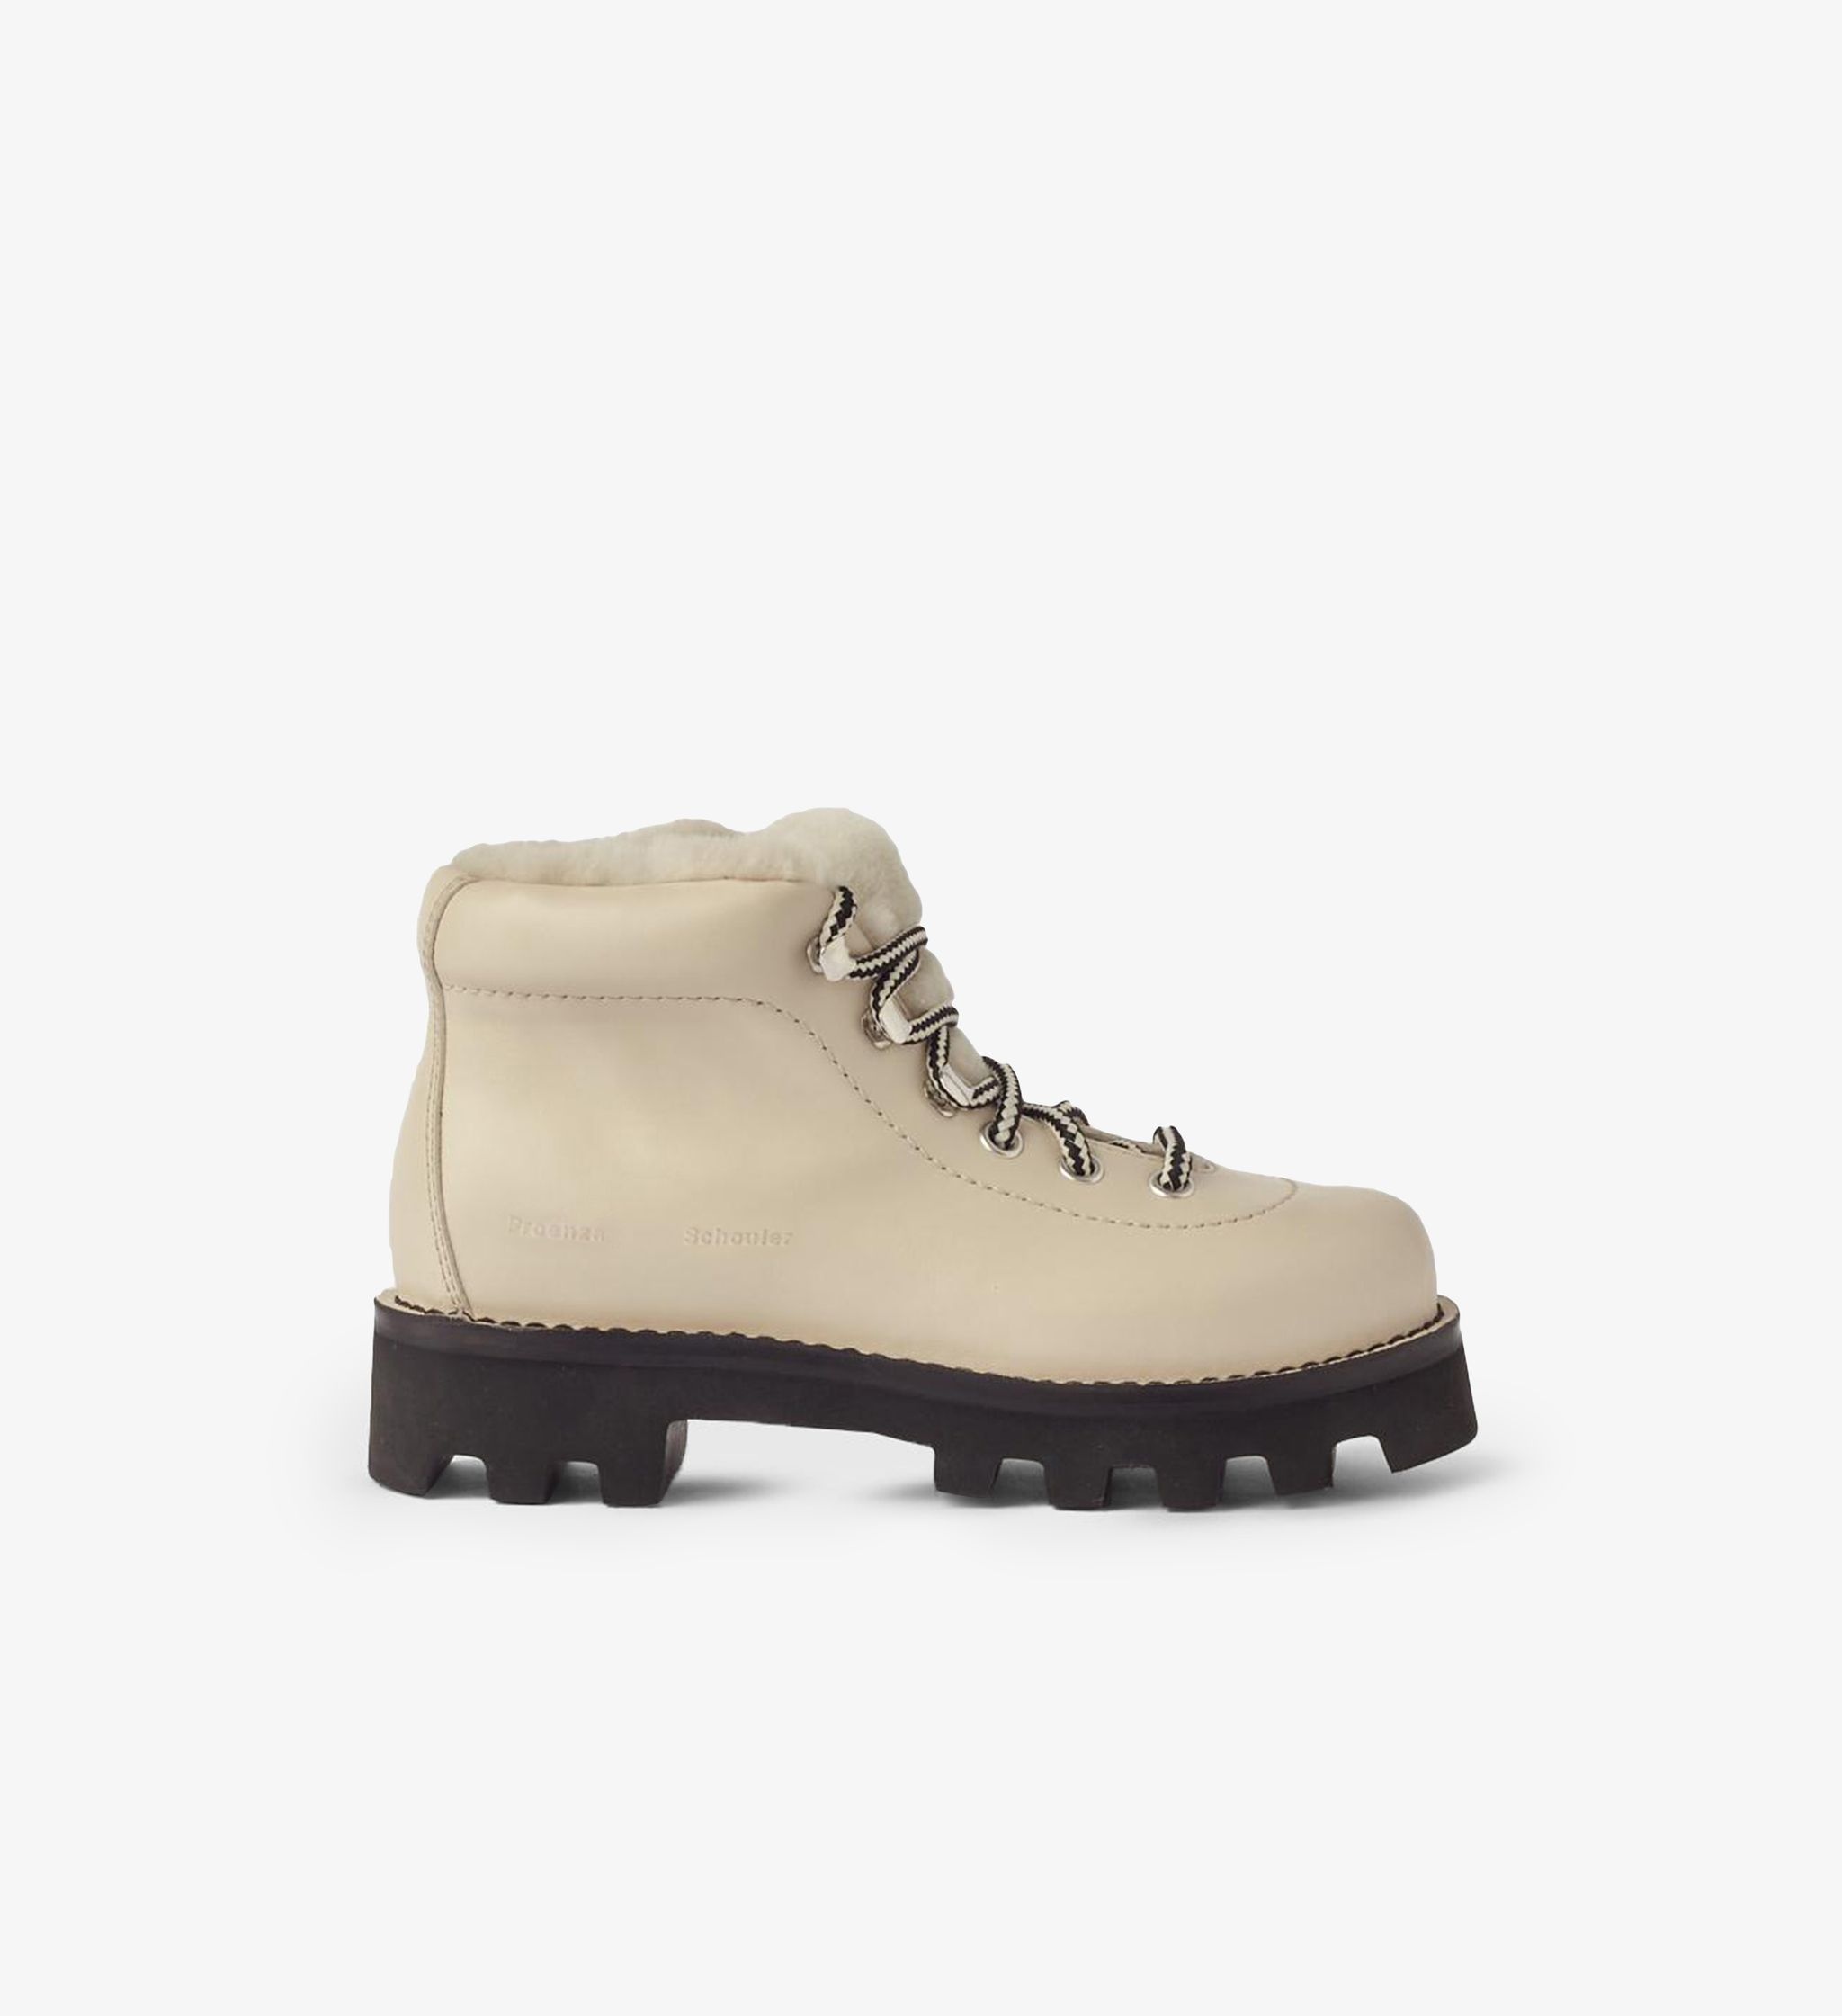 Shearling Lined Hiking Boots - 1